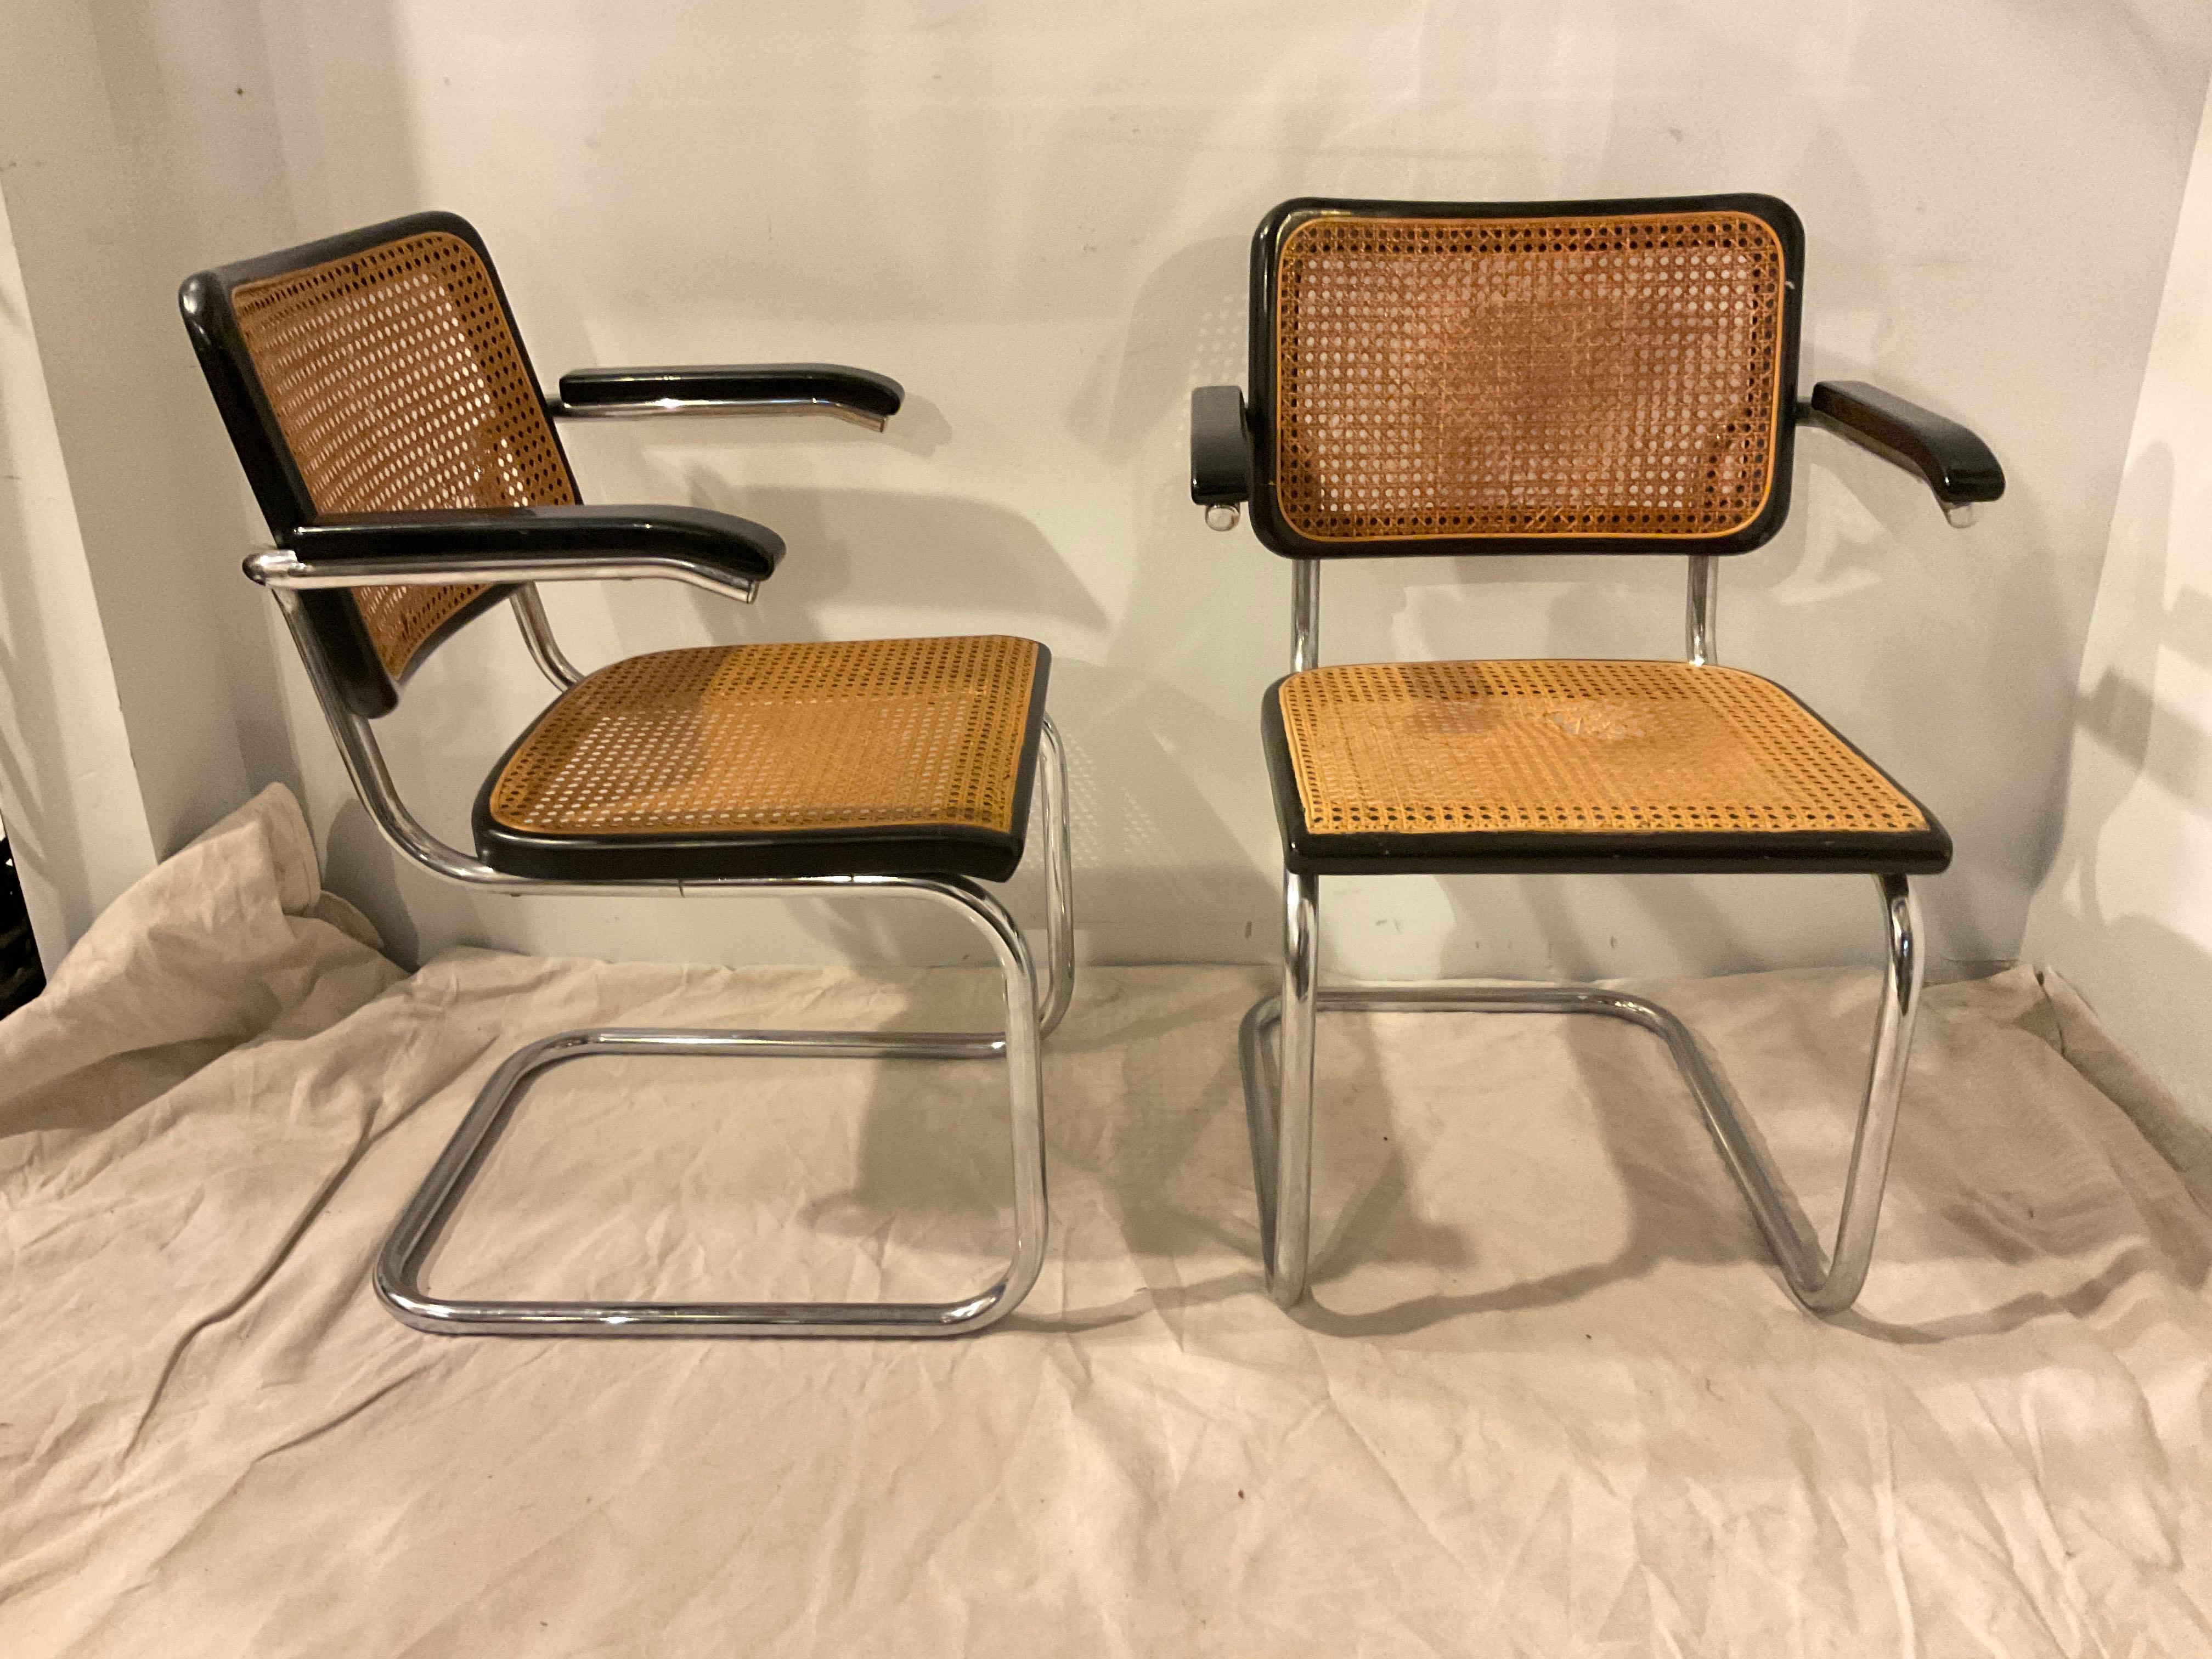 Pair of 1960s Cesca chairs by Marcel Breuer for Thonet.
One area of caning is fine, the 3 other sections need to be re caned.